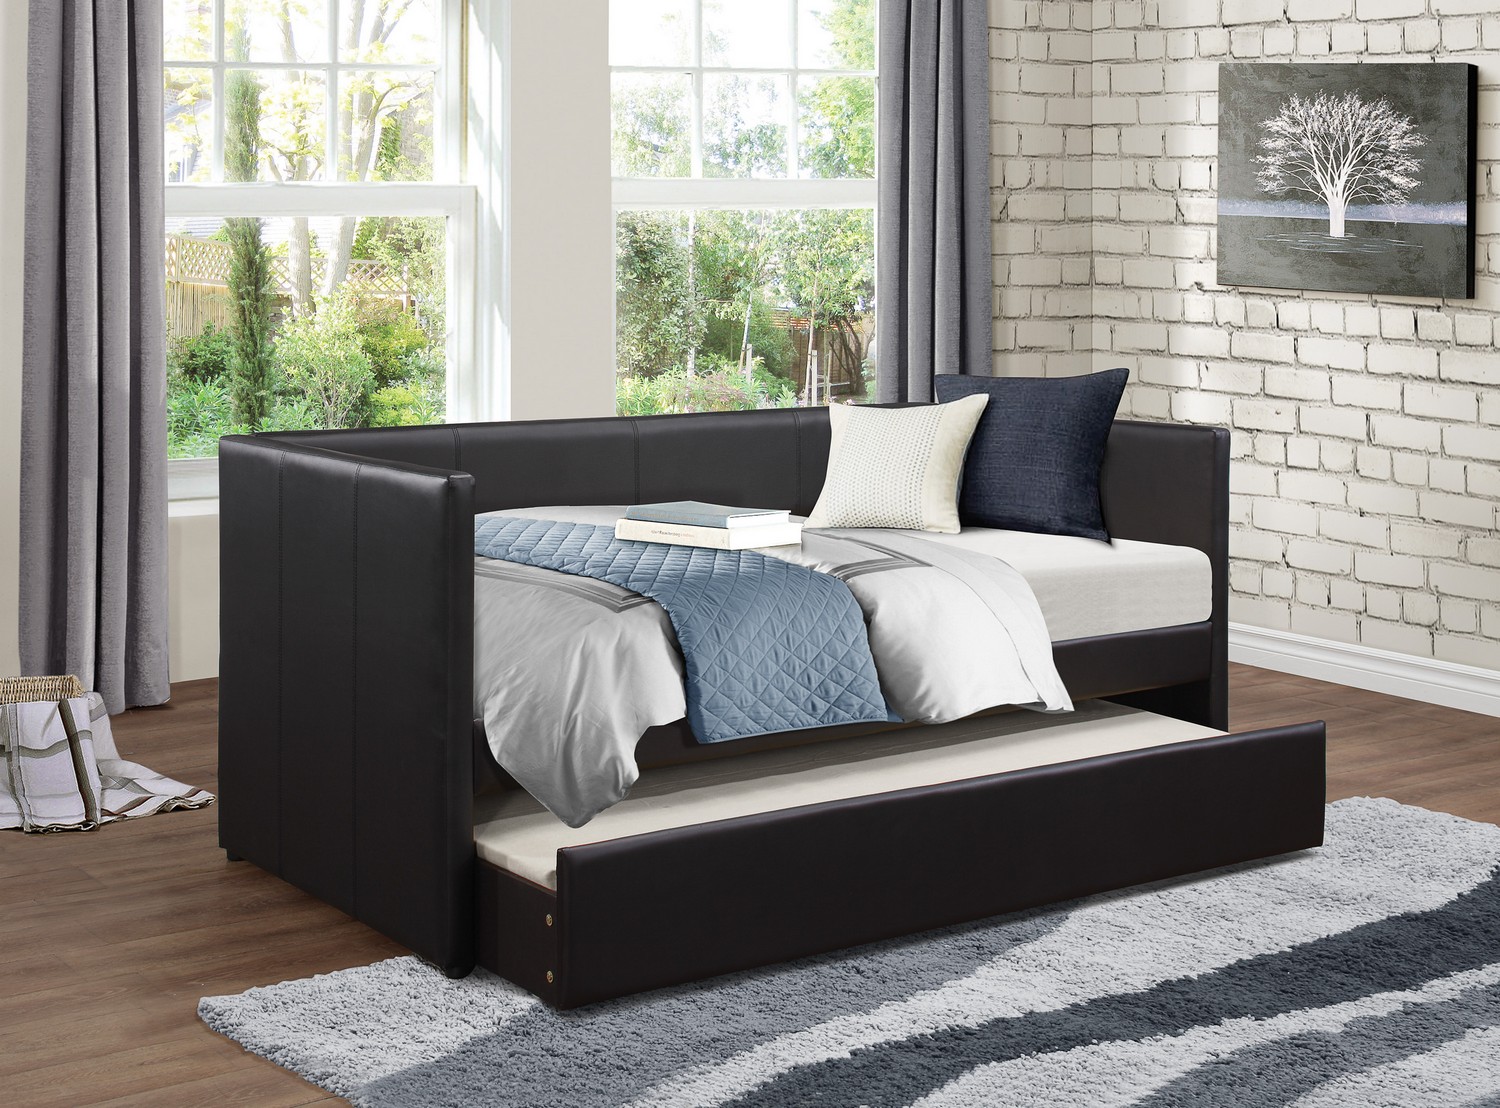 Homelegance Andra Daybed with Trundle - Black